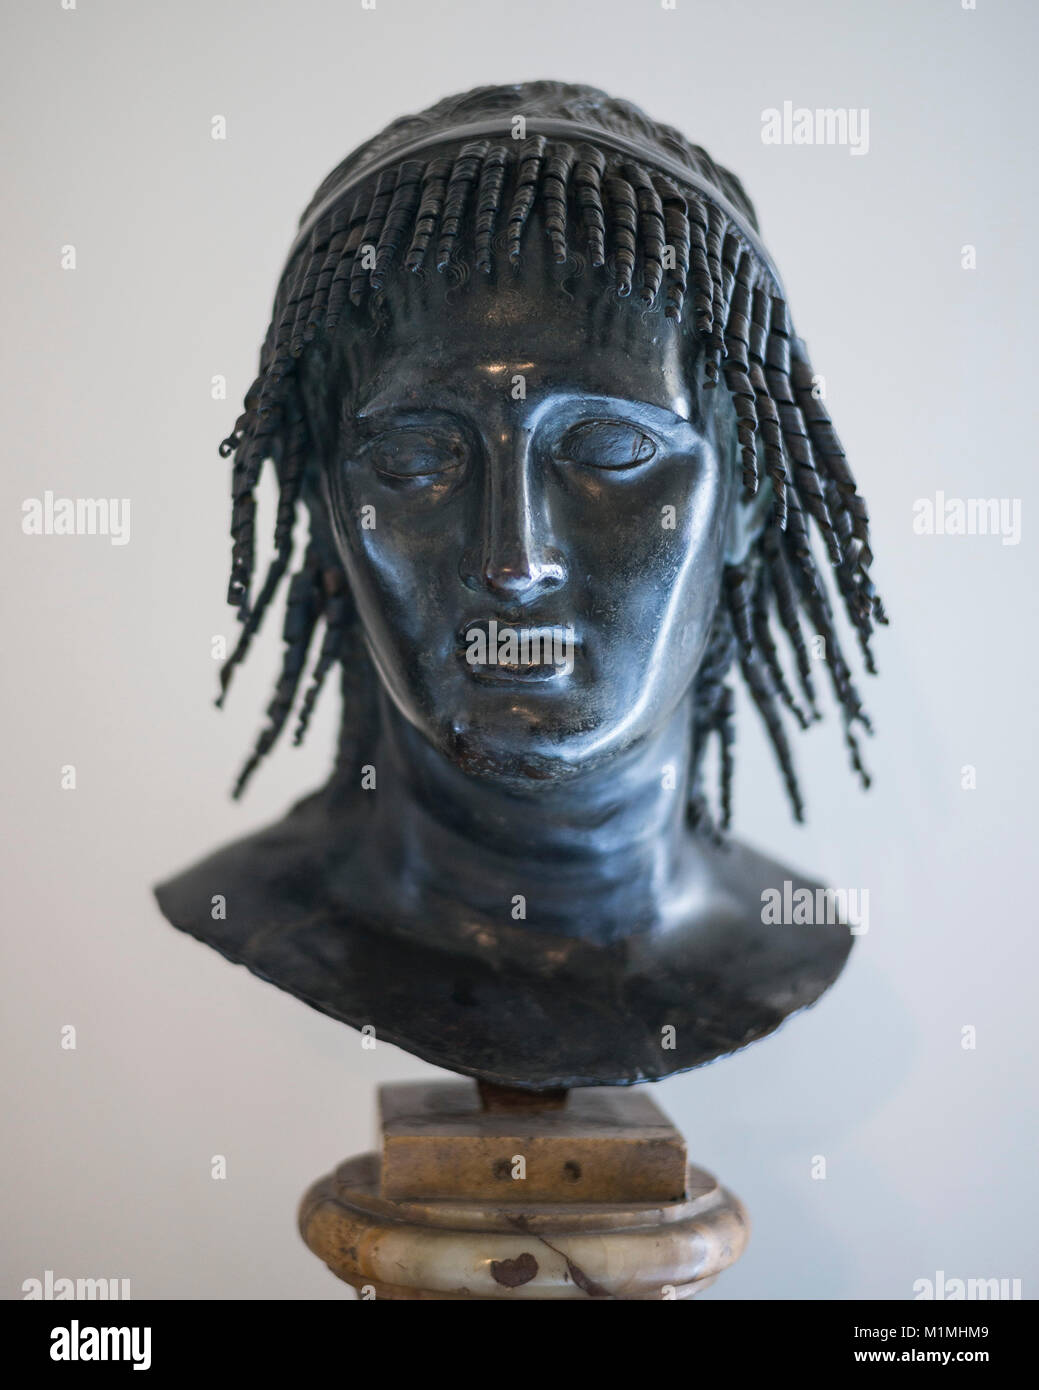 Naples. Italy. Bust portrait of Ptolemy Apion, Museo Archeologico Nazionale di Napoli. National Archaeological Museum of Naples. Stock Photo